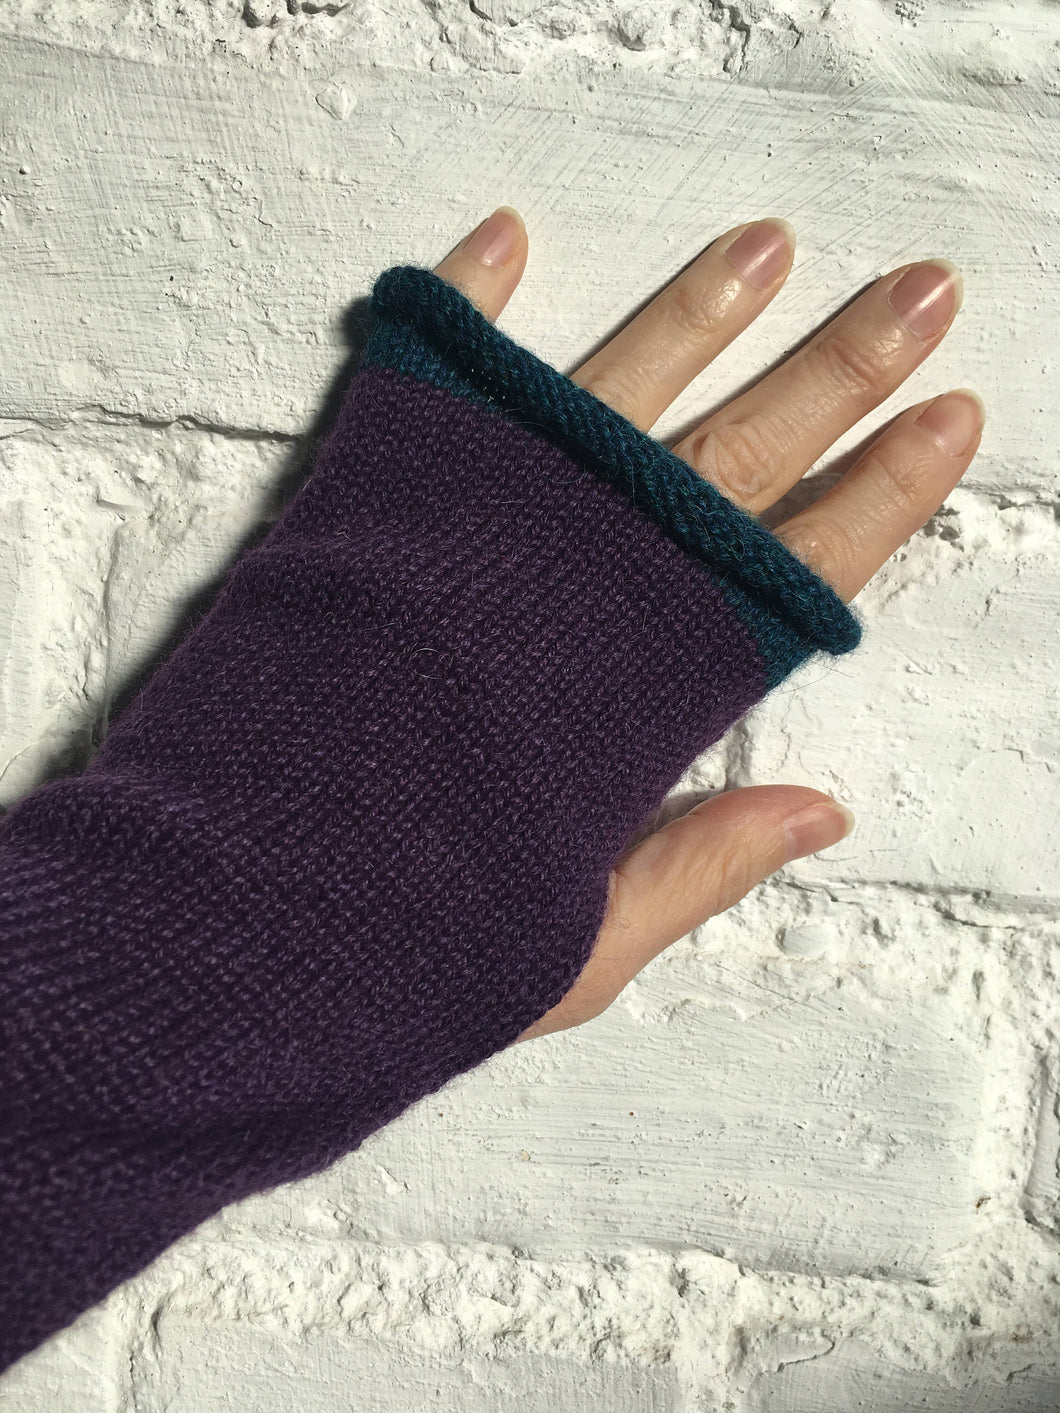 Purple Alpaca Knitted Fingerless Gloves with Blue Trim at Fingertips. By Lord and Taft